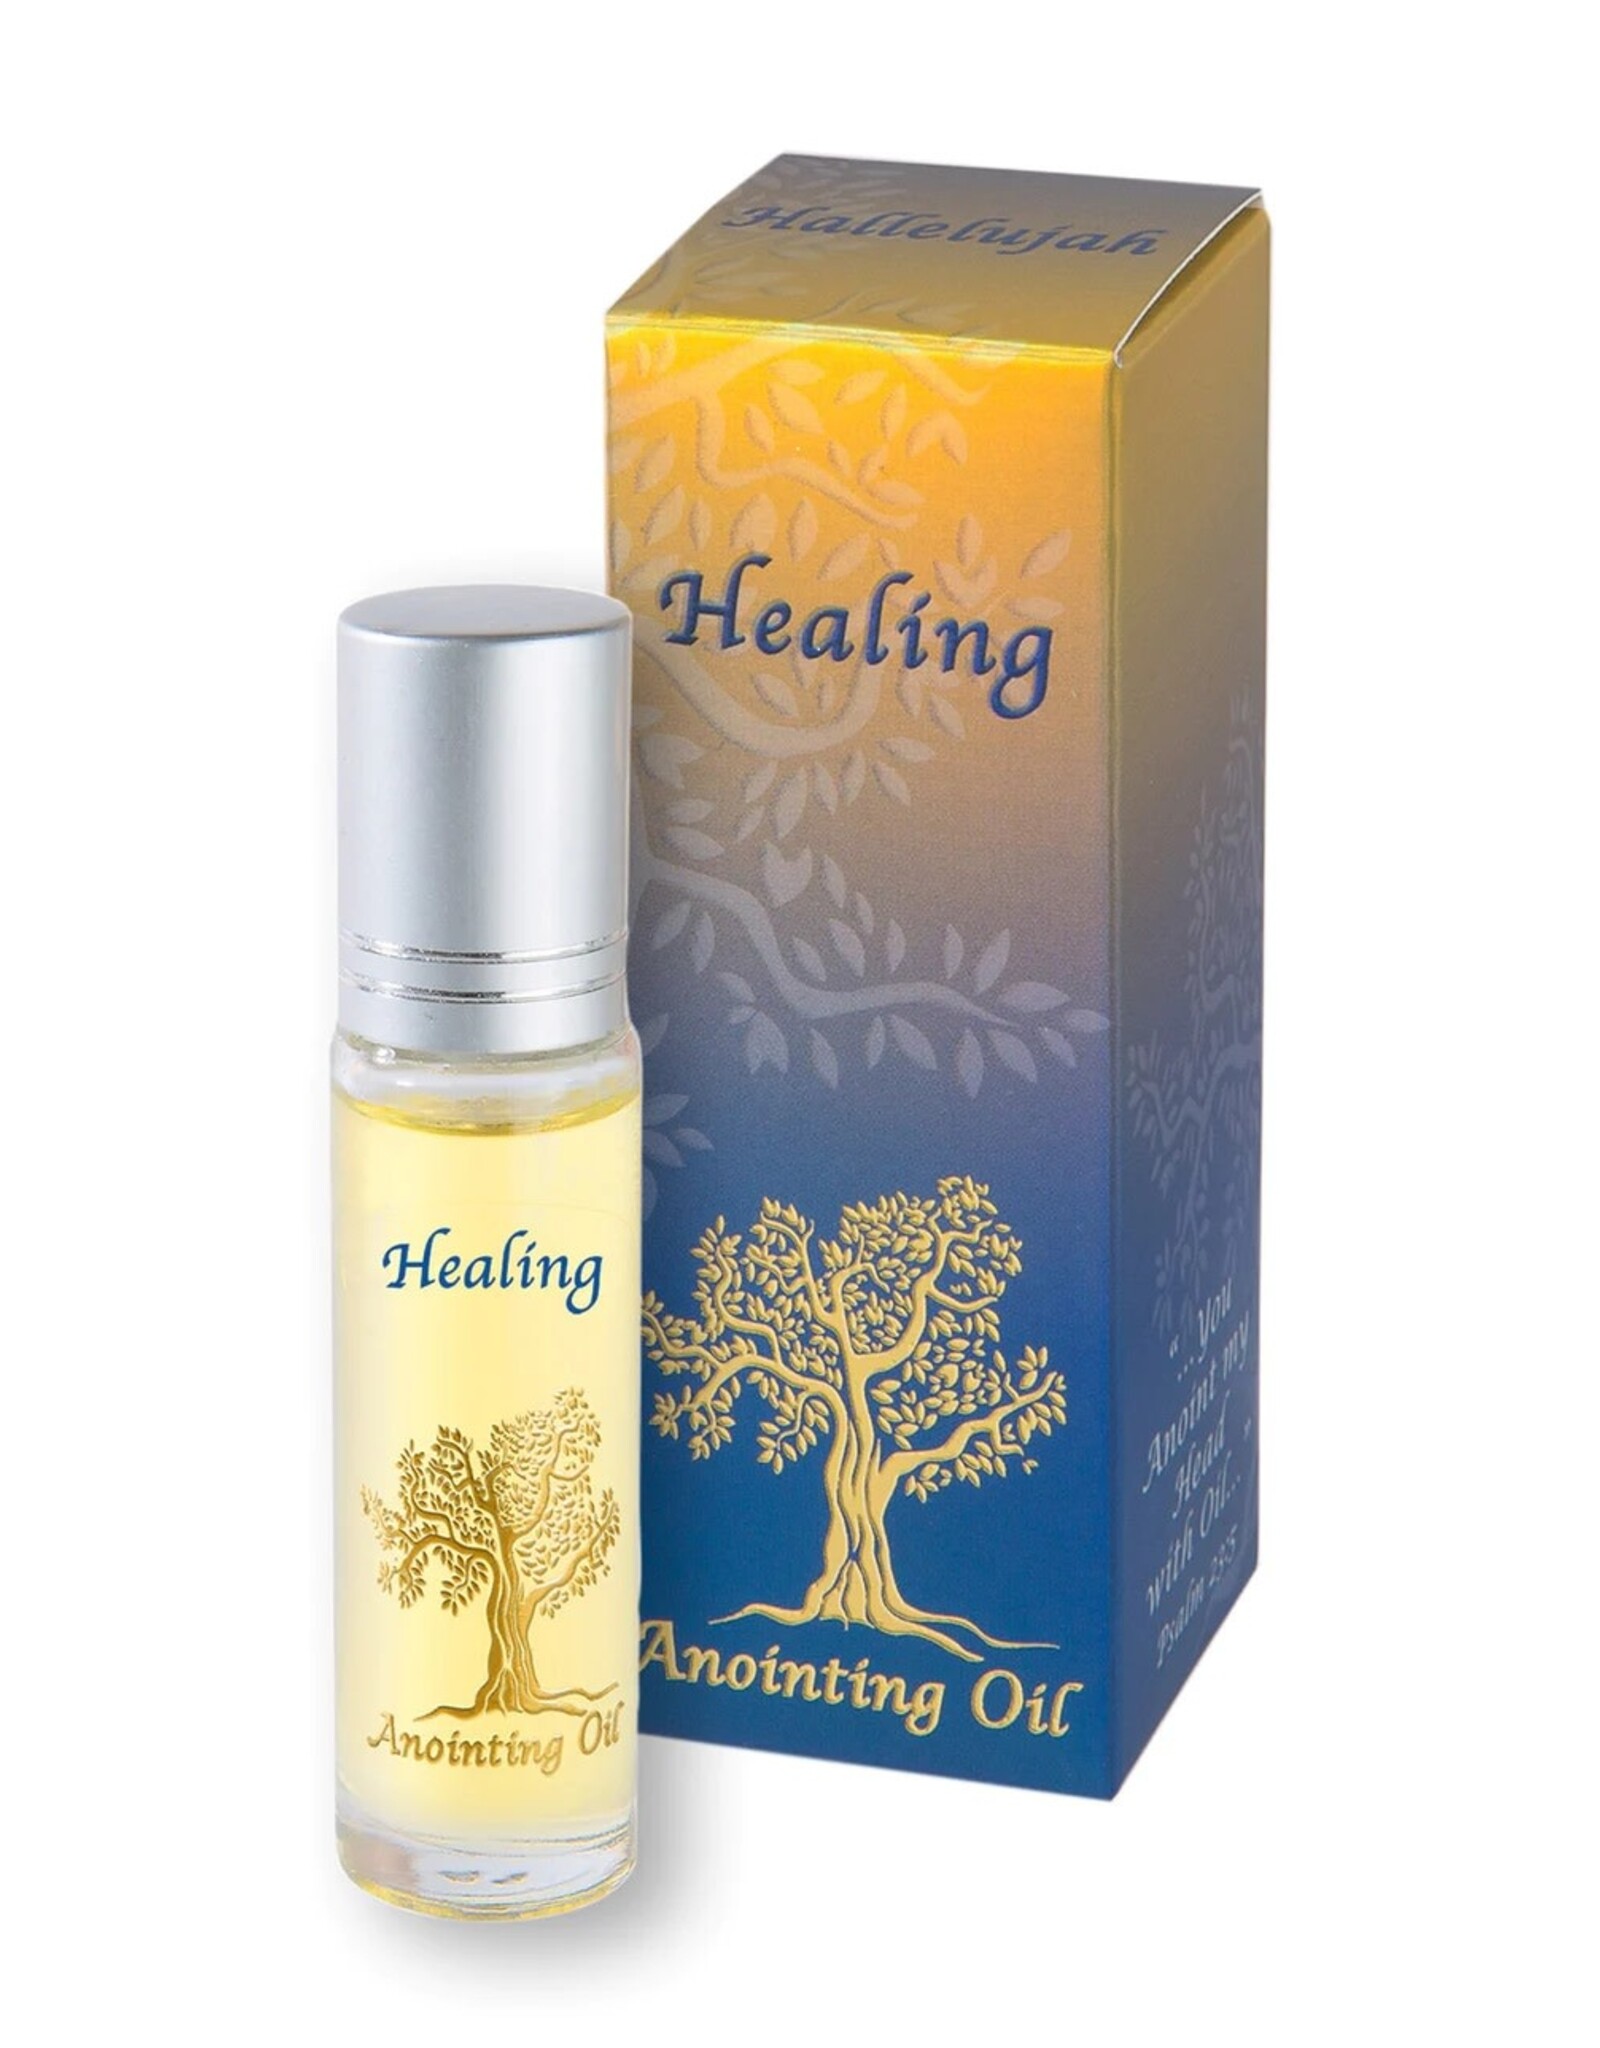 Holy Land Gifts Anointing Oil: Healing Oil